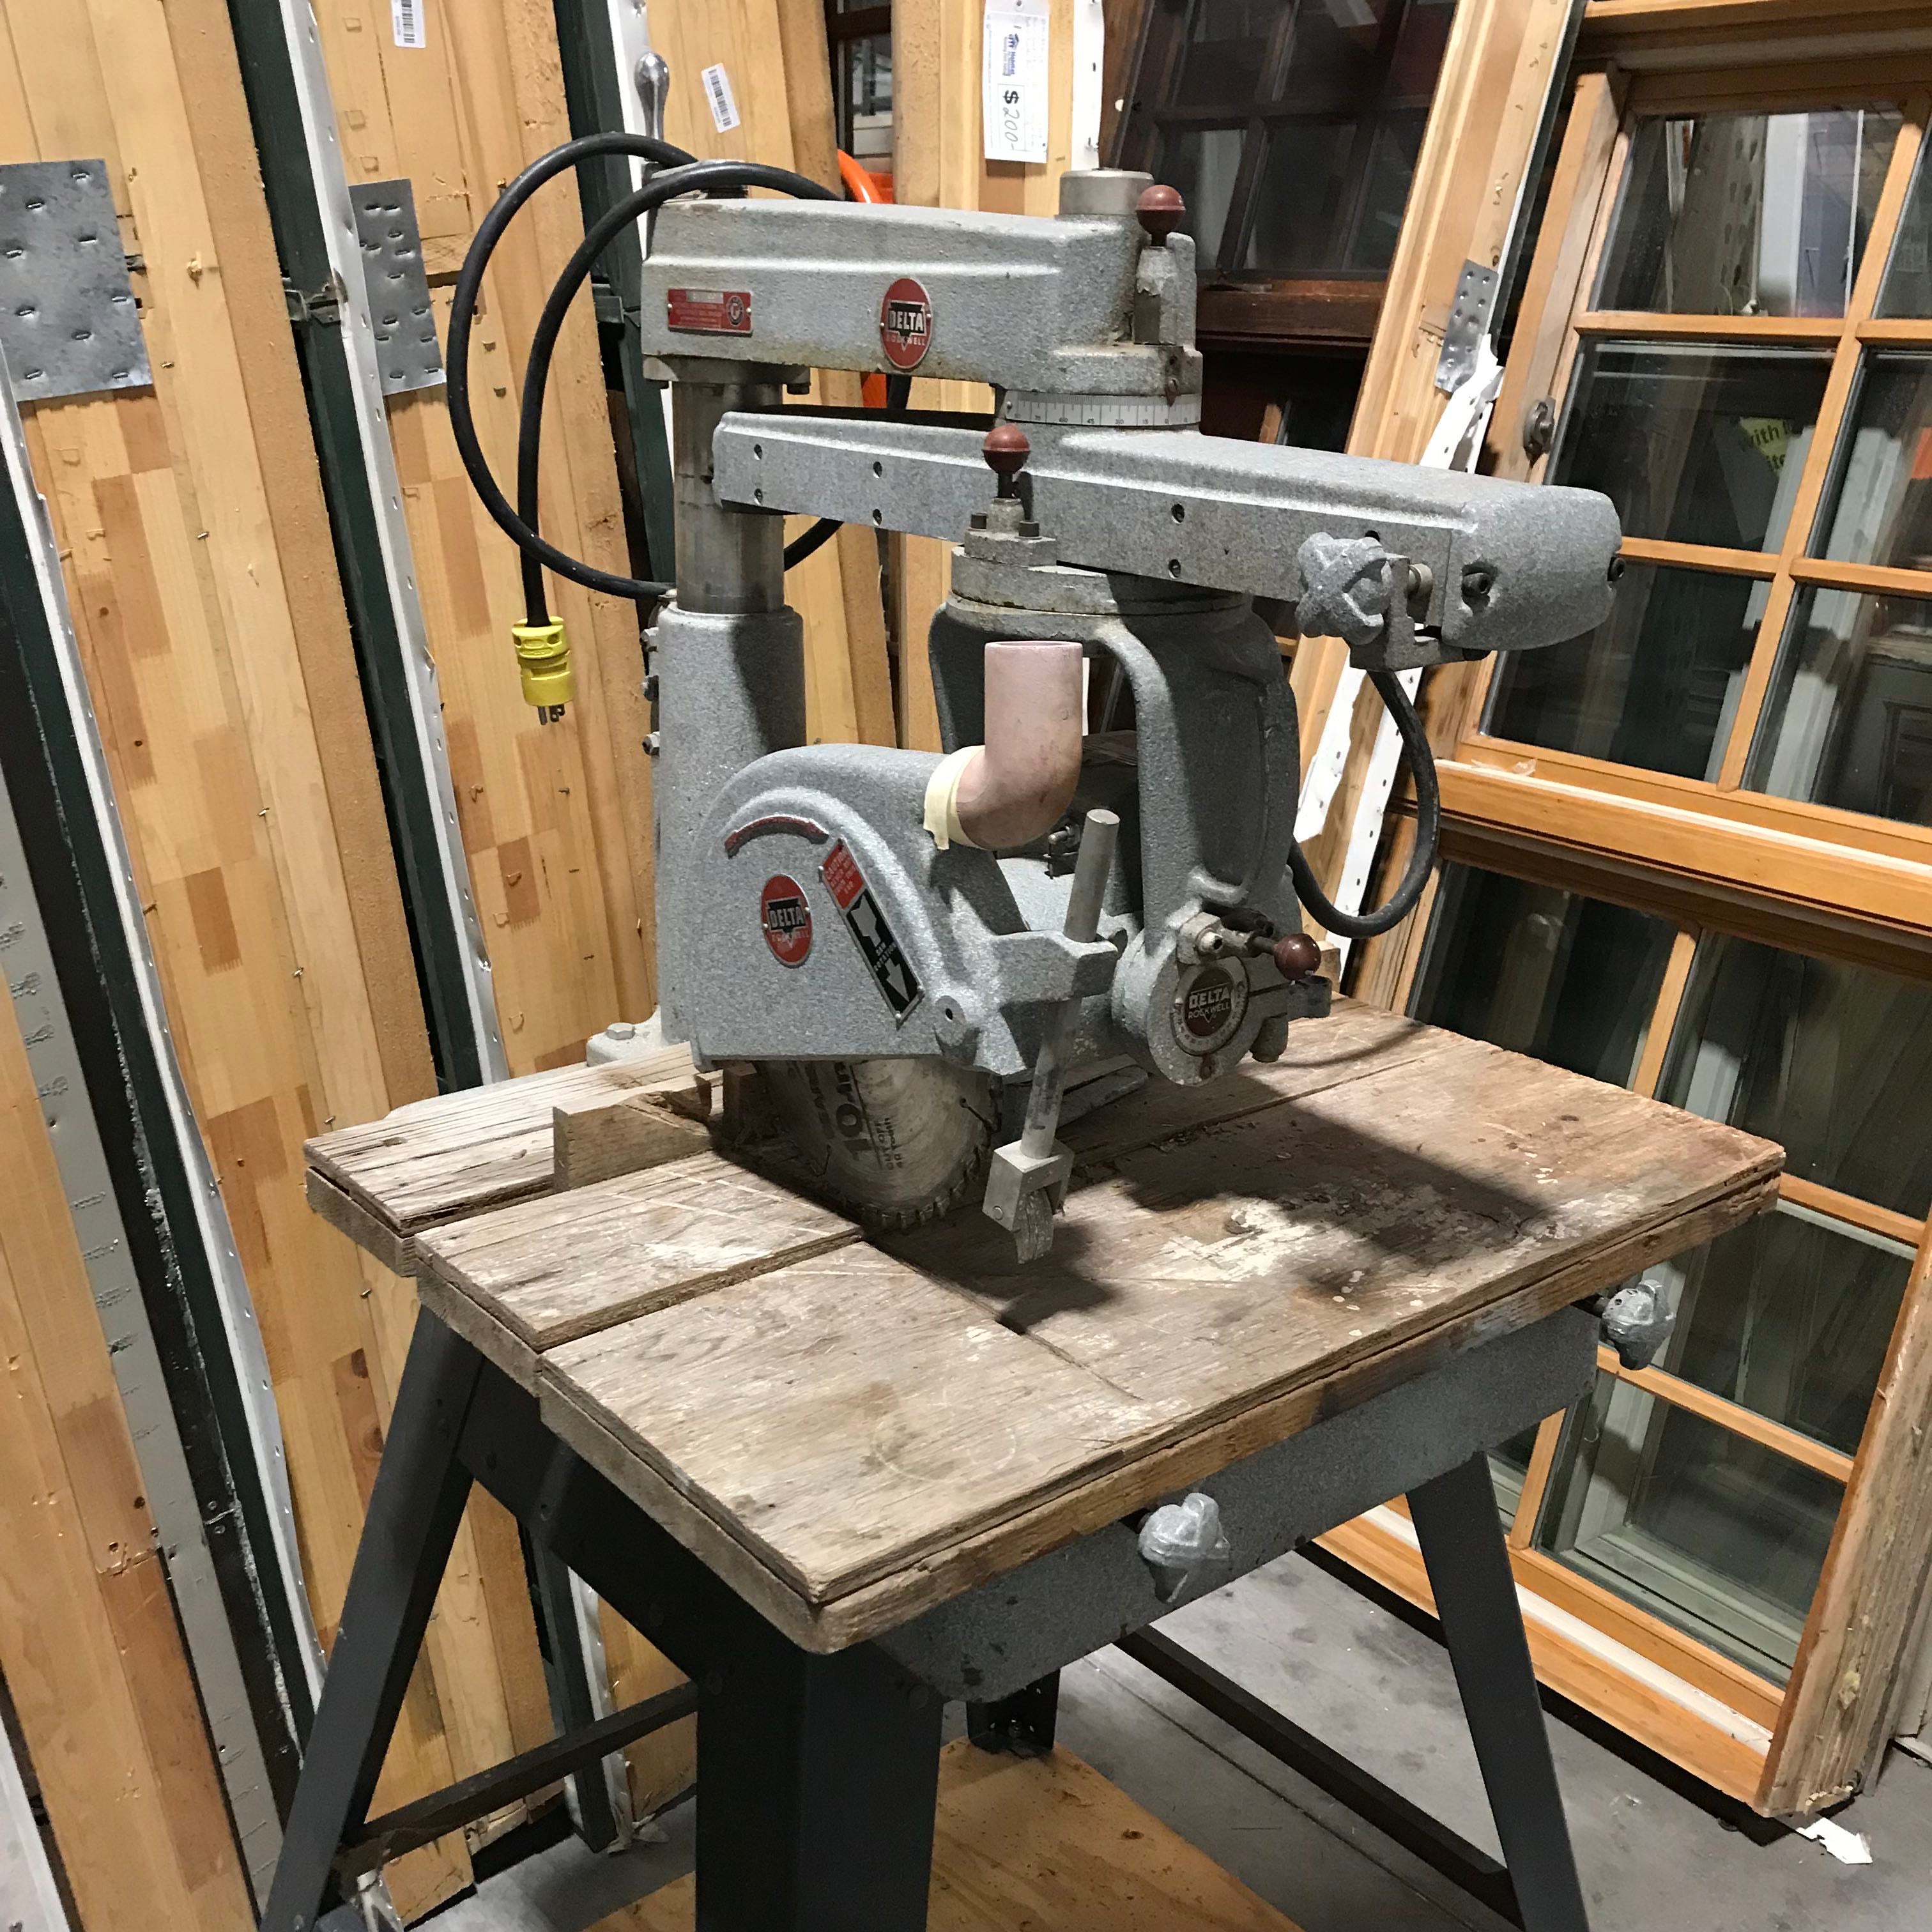 Delta Rockwell with Stand Radial Arm Saw